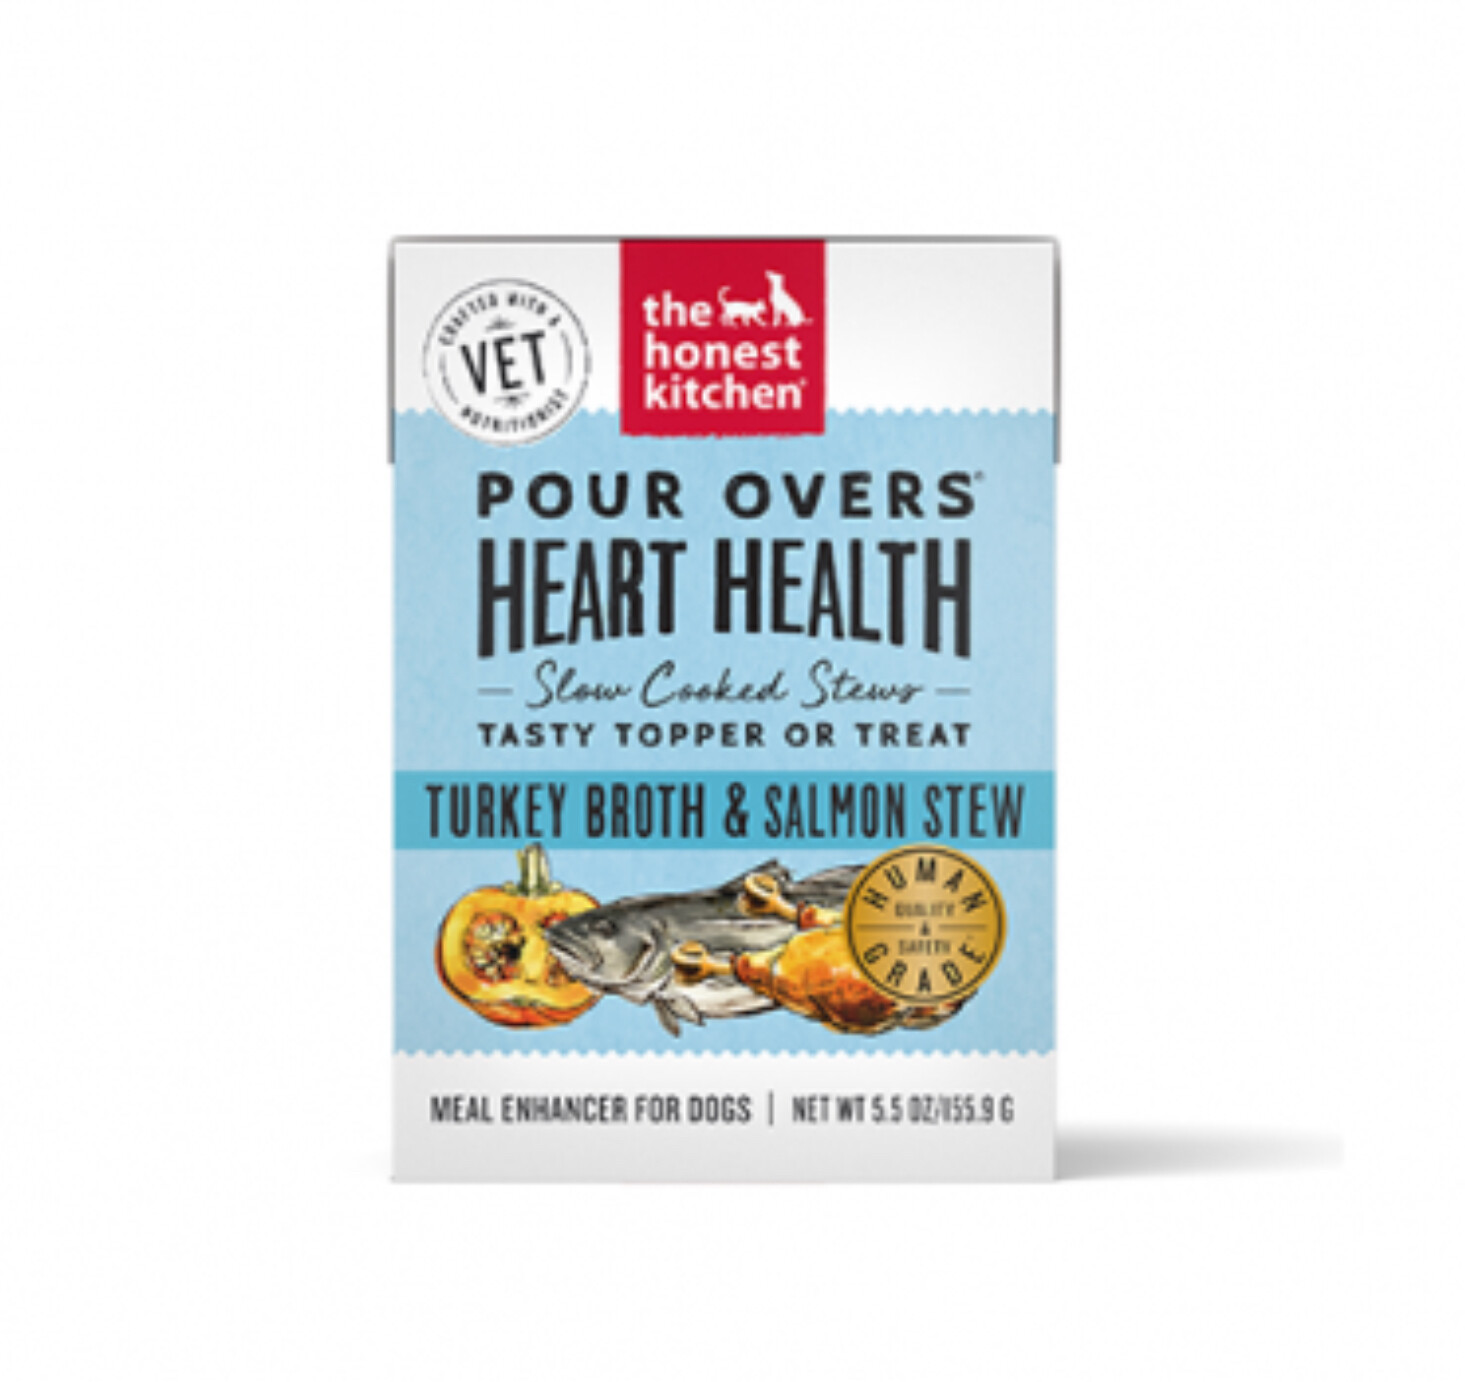 Heart Health Pour Overs - Turkey Broth & Salmon Stew - The Honest Kitchen